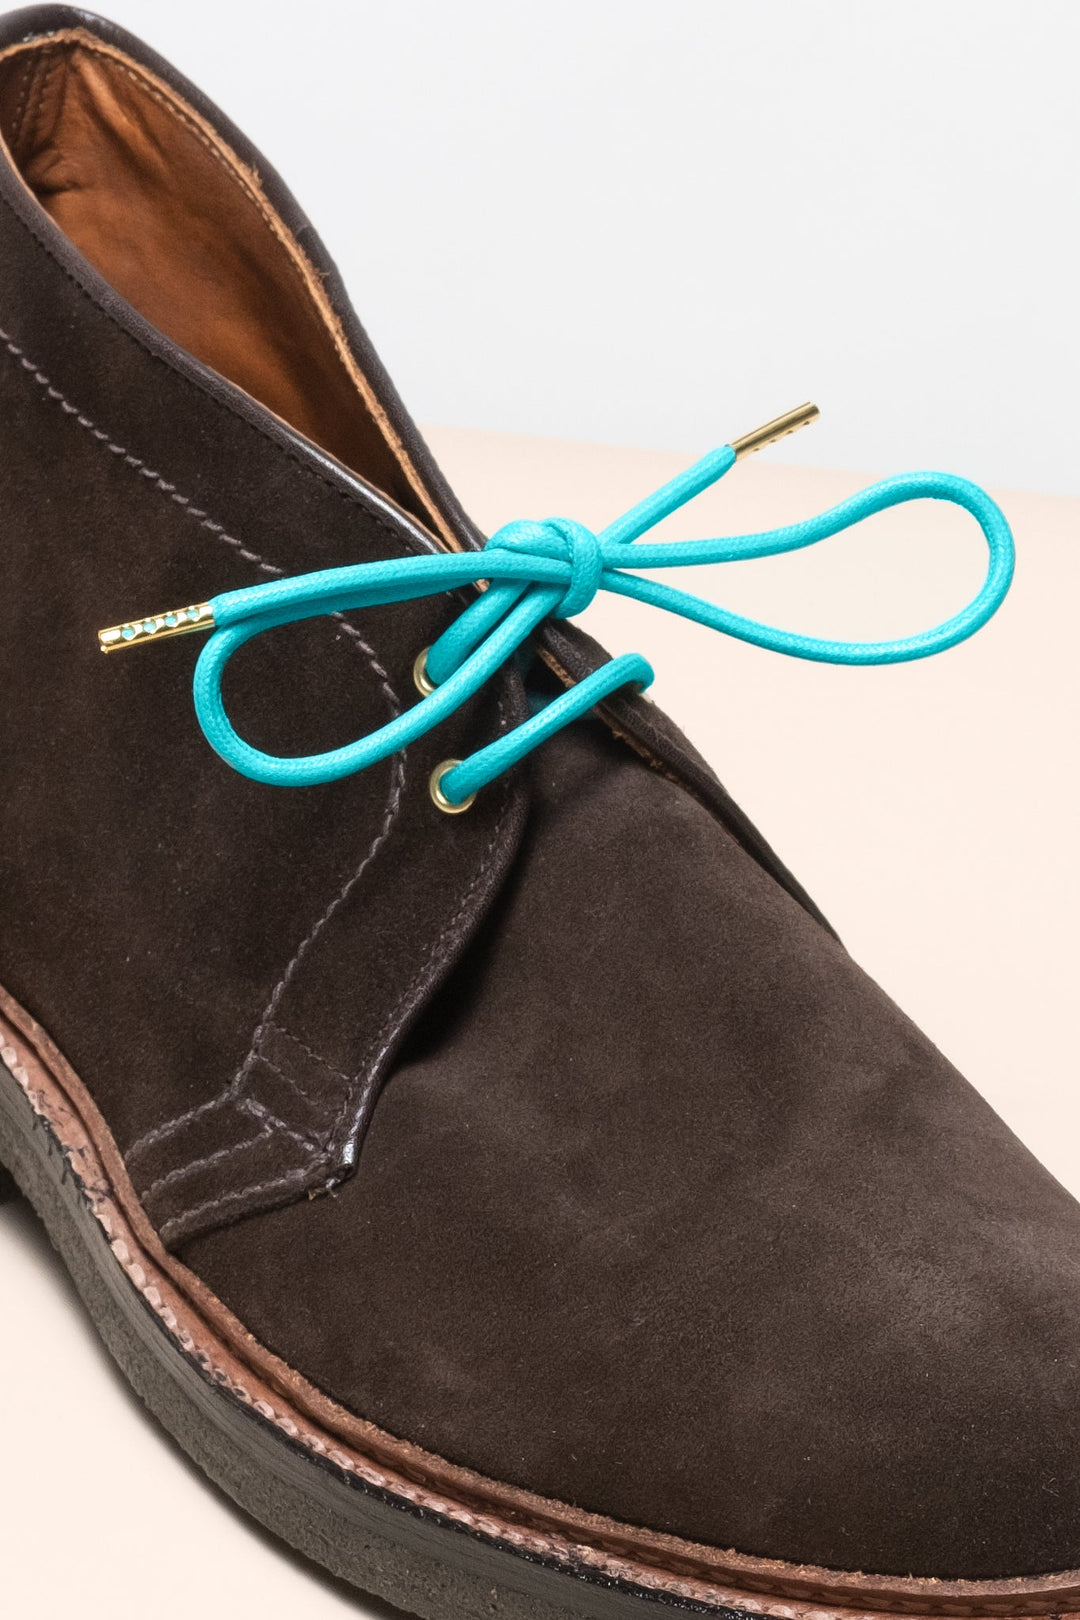 Turquoise - 4mm round waxed shoelaces for boots and shoes made from 100% organic cotton - Senkels